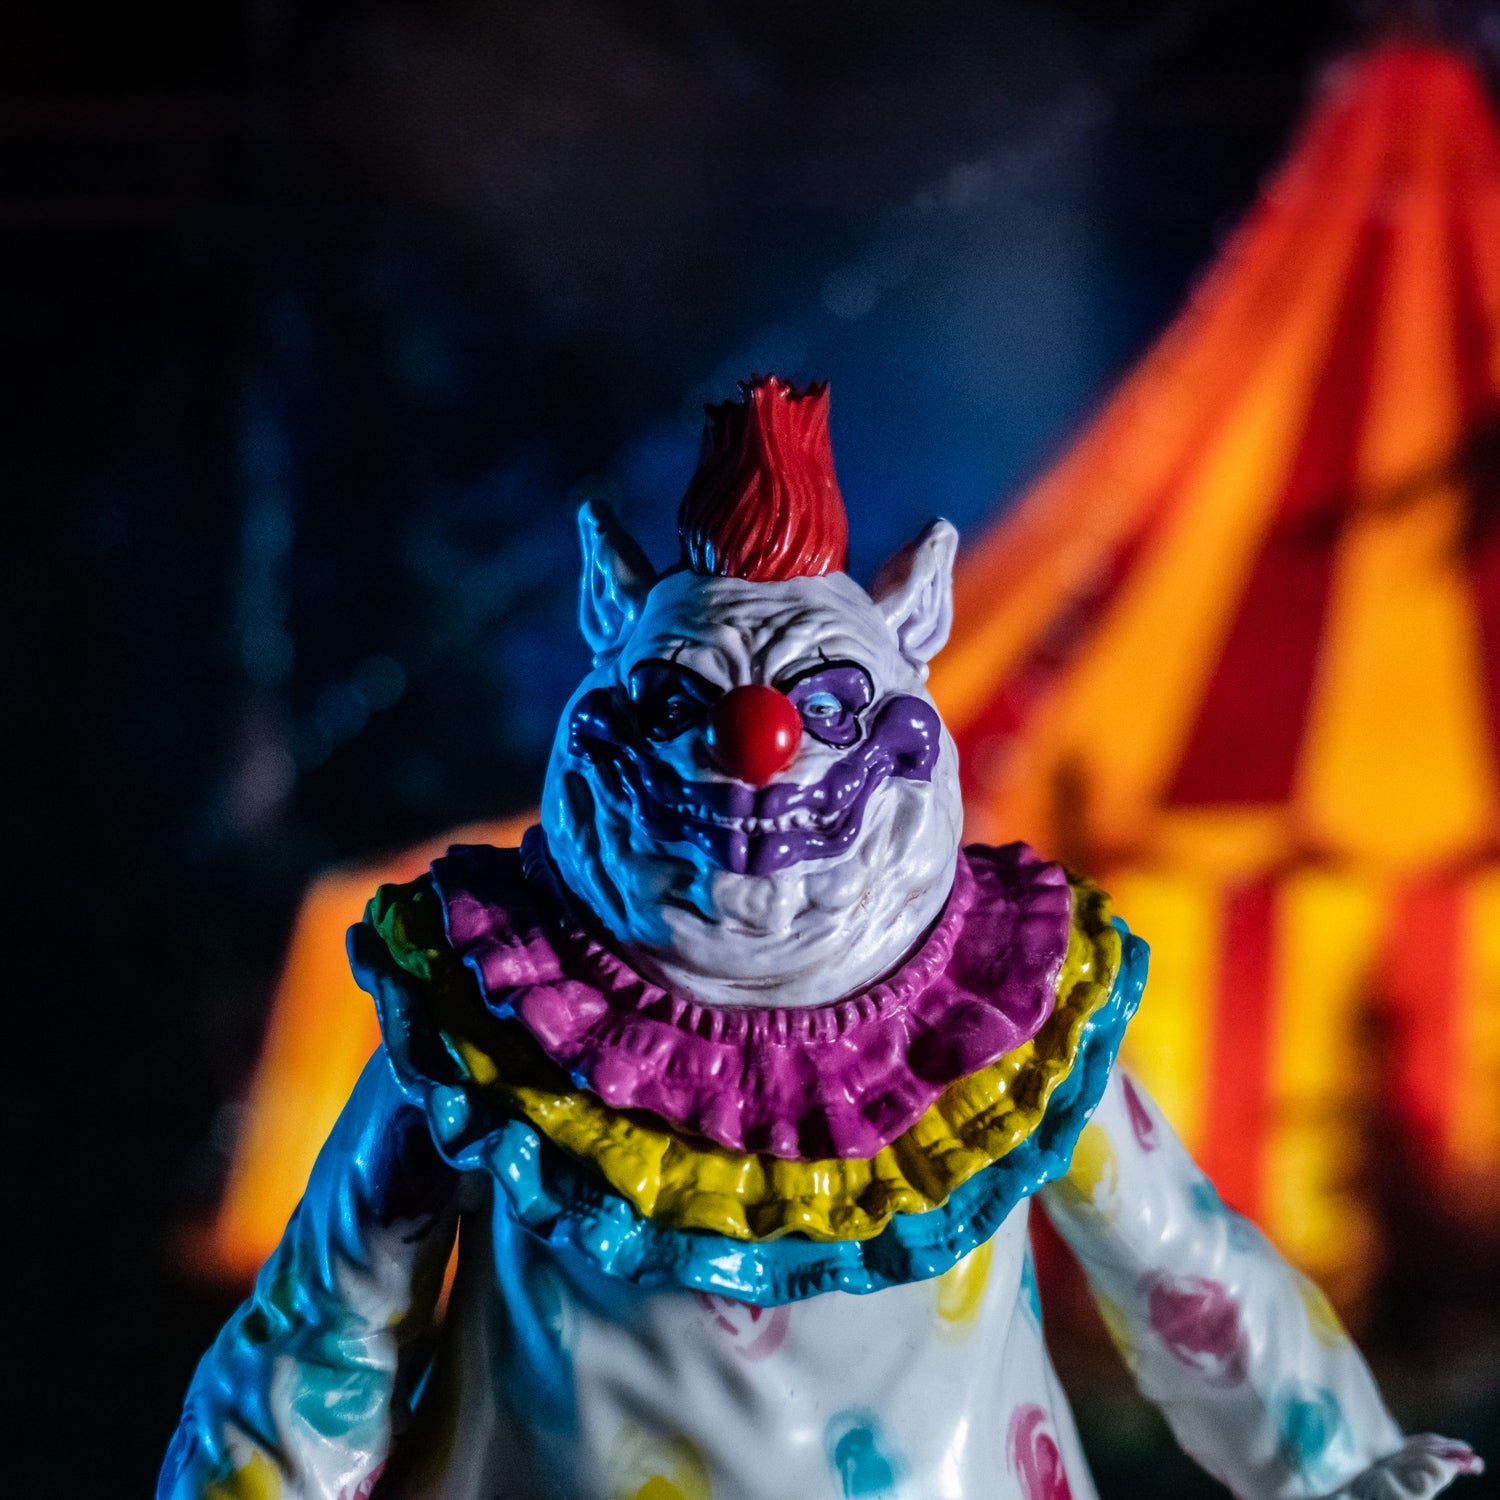 Killer Klowns From Outer Space Fatso 8" Collectible Action Figure